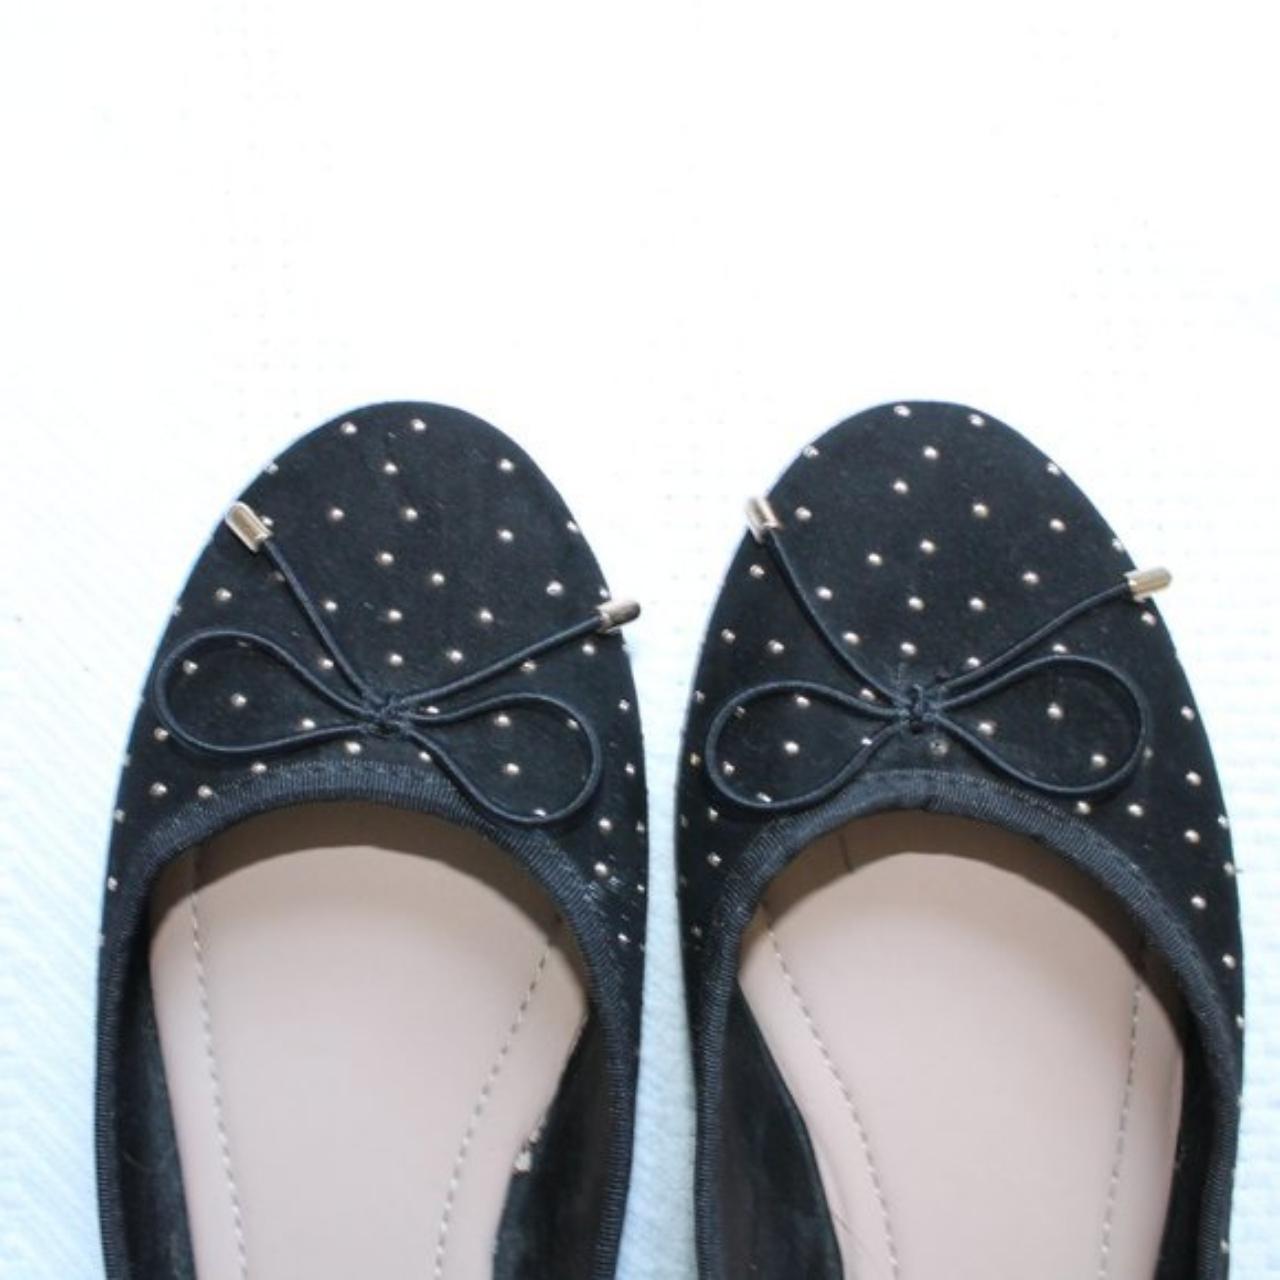 Product Image 2 - Outer Material: Fabric
Inner Material: Manmade
Sole: